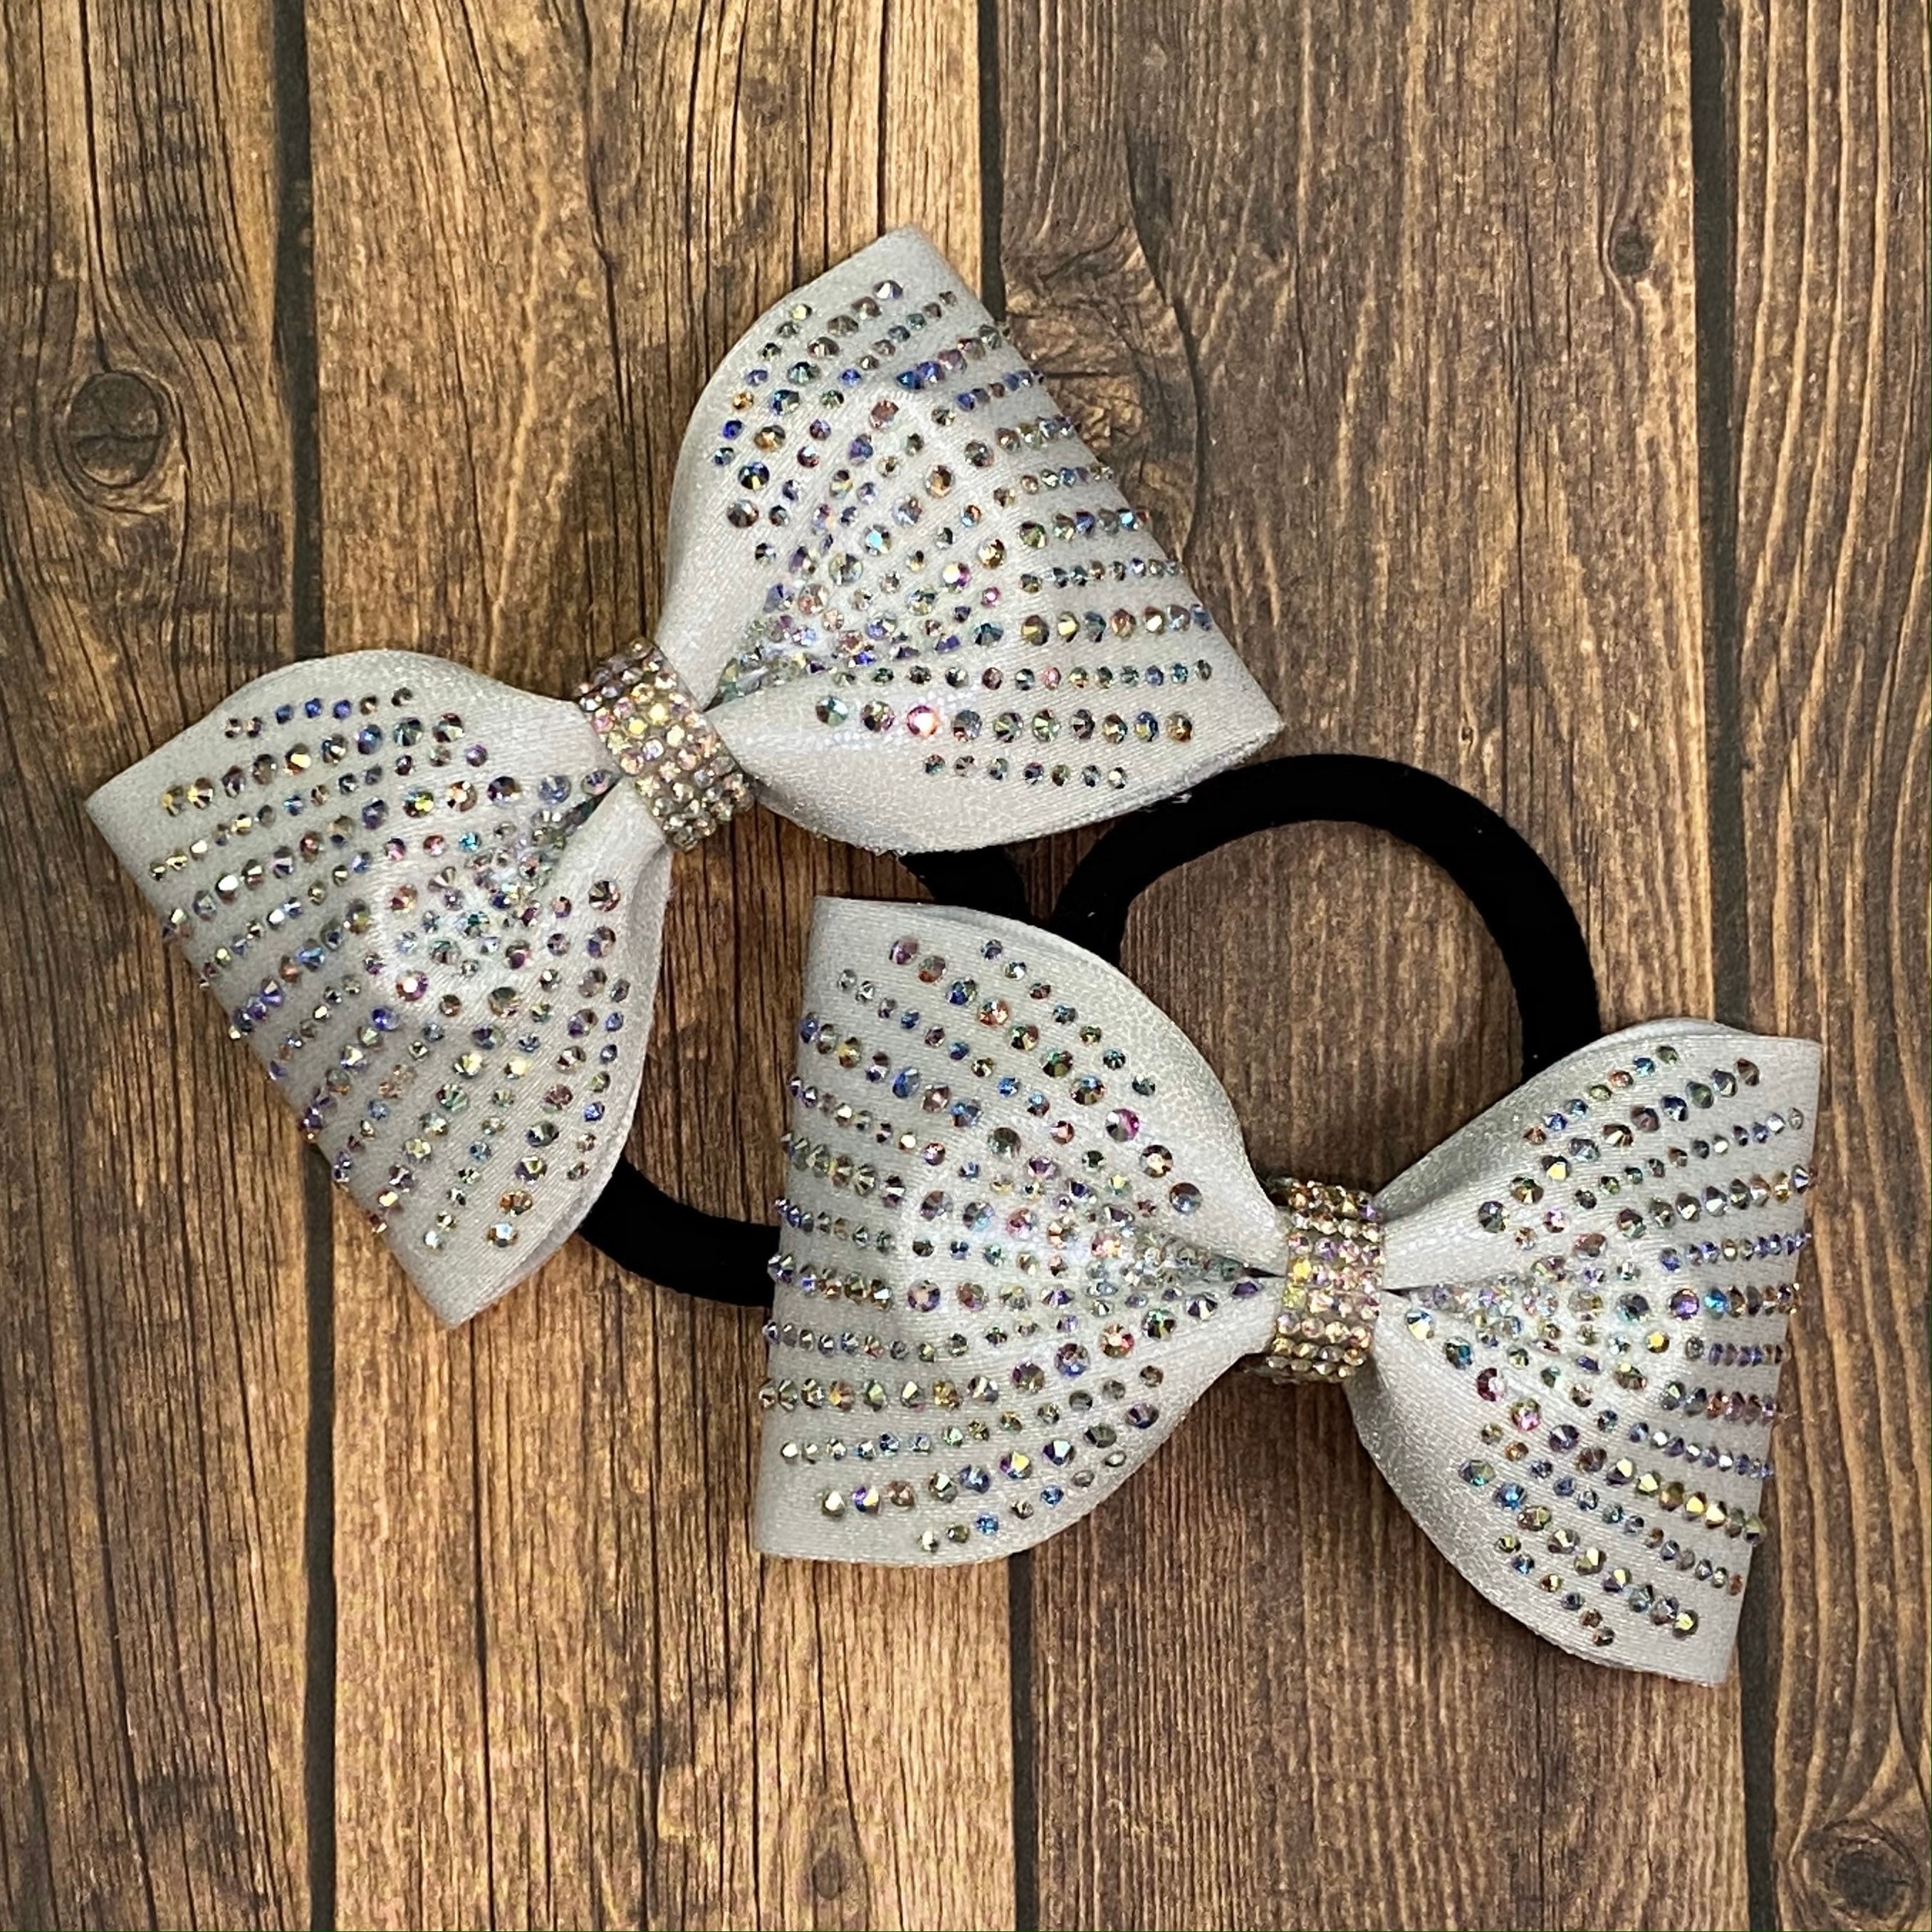 Clear Rhinestone Button Earrings, High-quality cheerleading uniforms,  cheer shoes, cheer bows, cheer accessories, and more